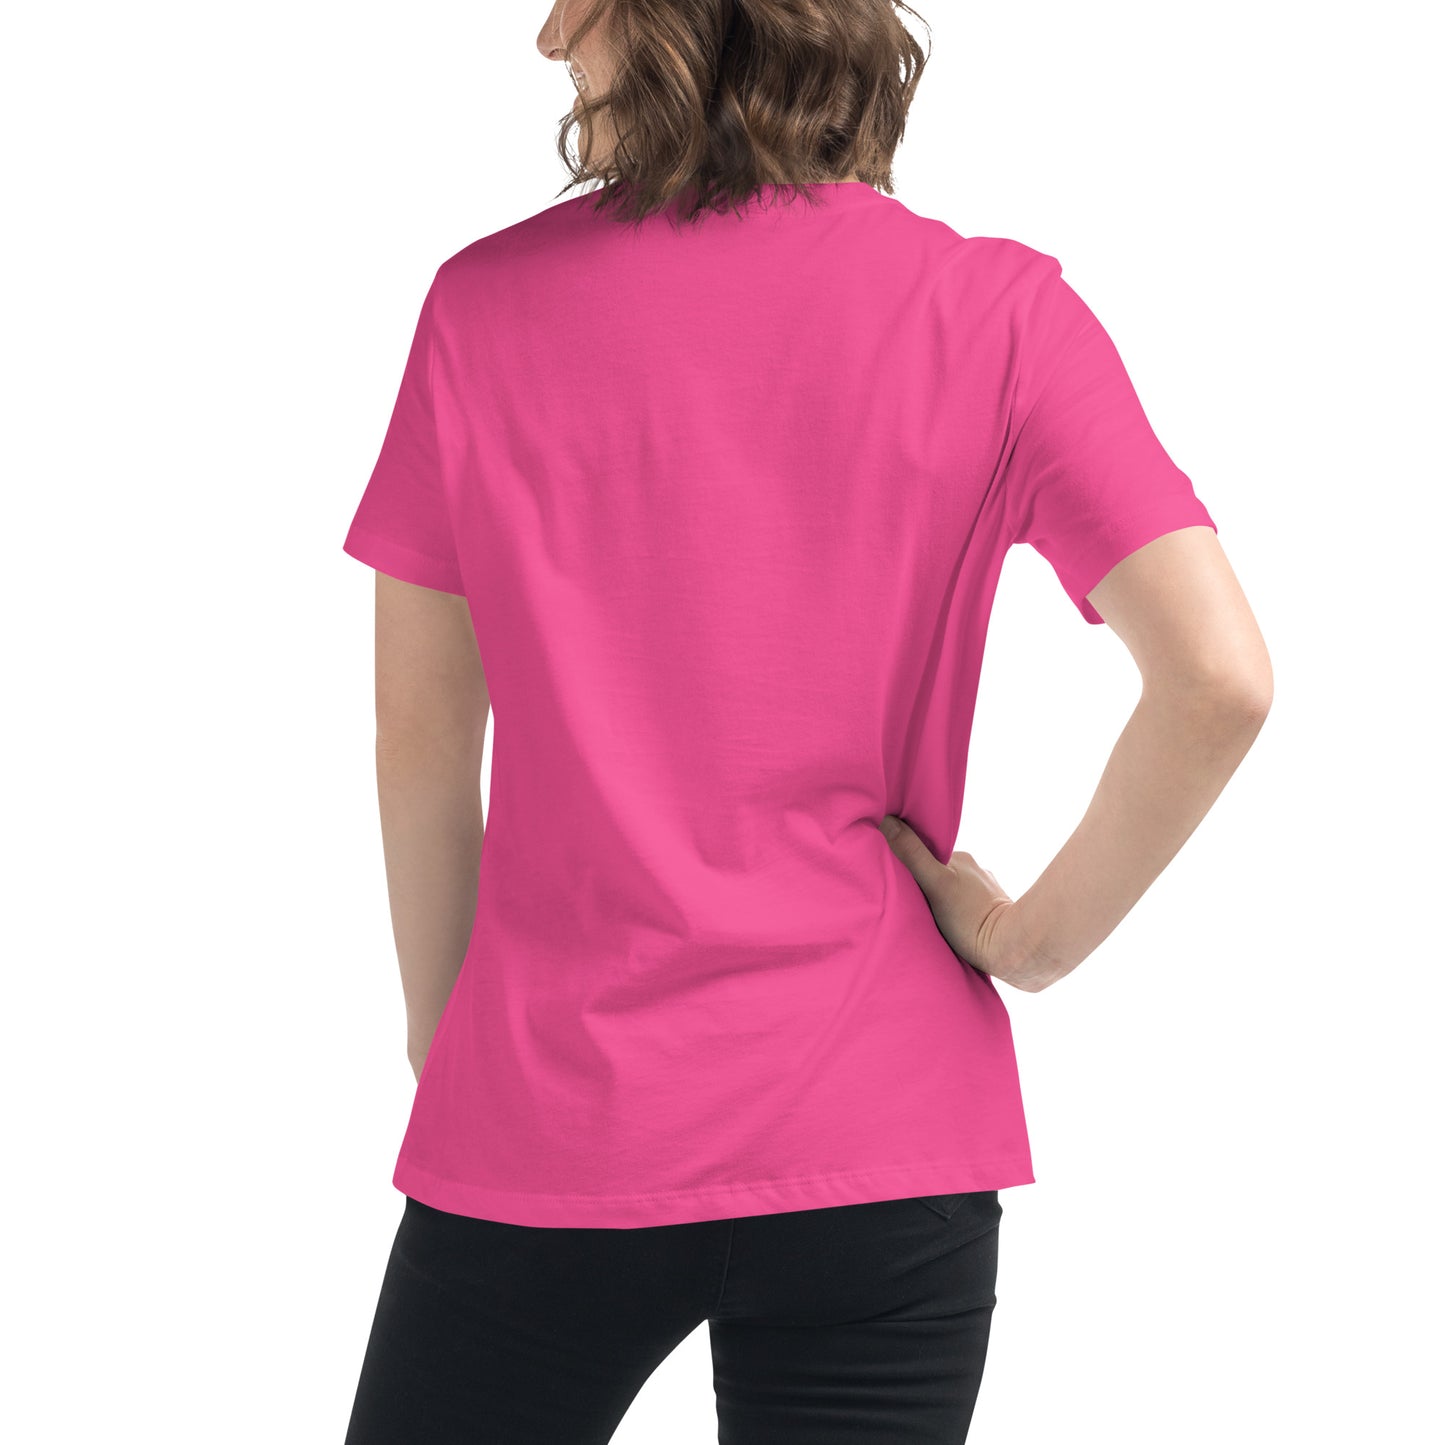 Nurture Your Nature (dolphins) - Women's Relaxed T-Shirt